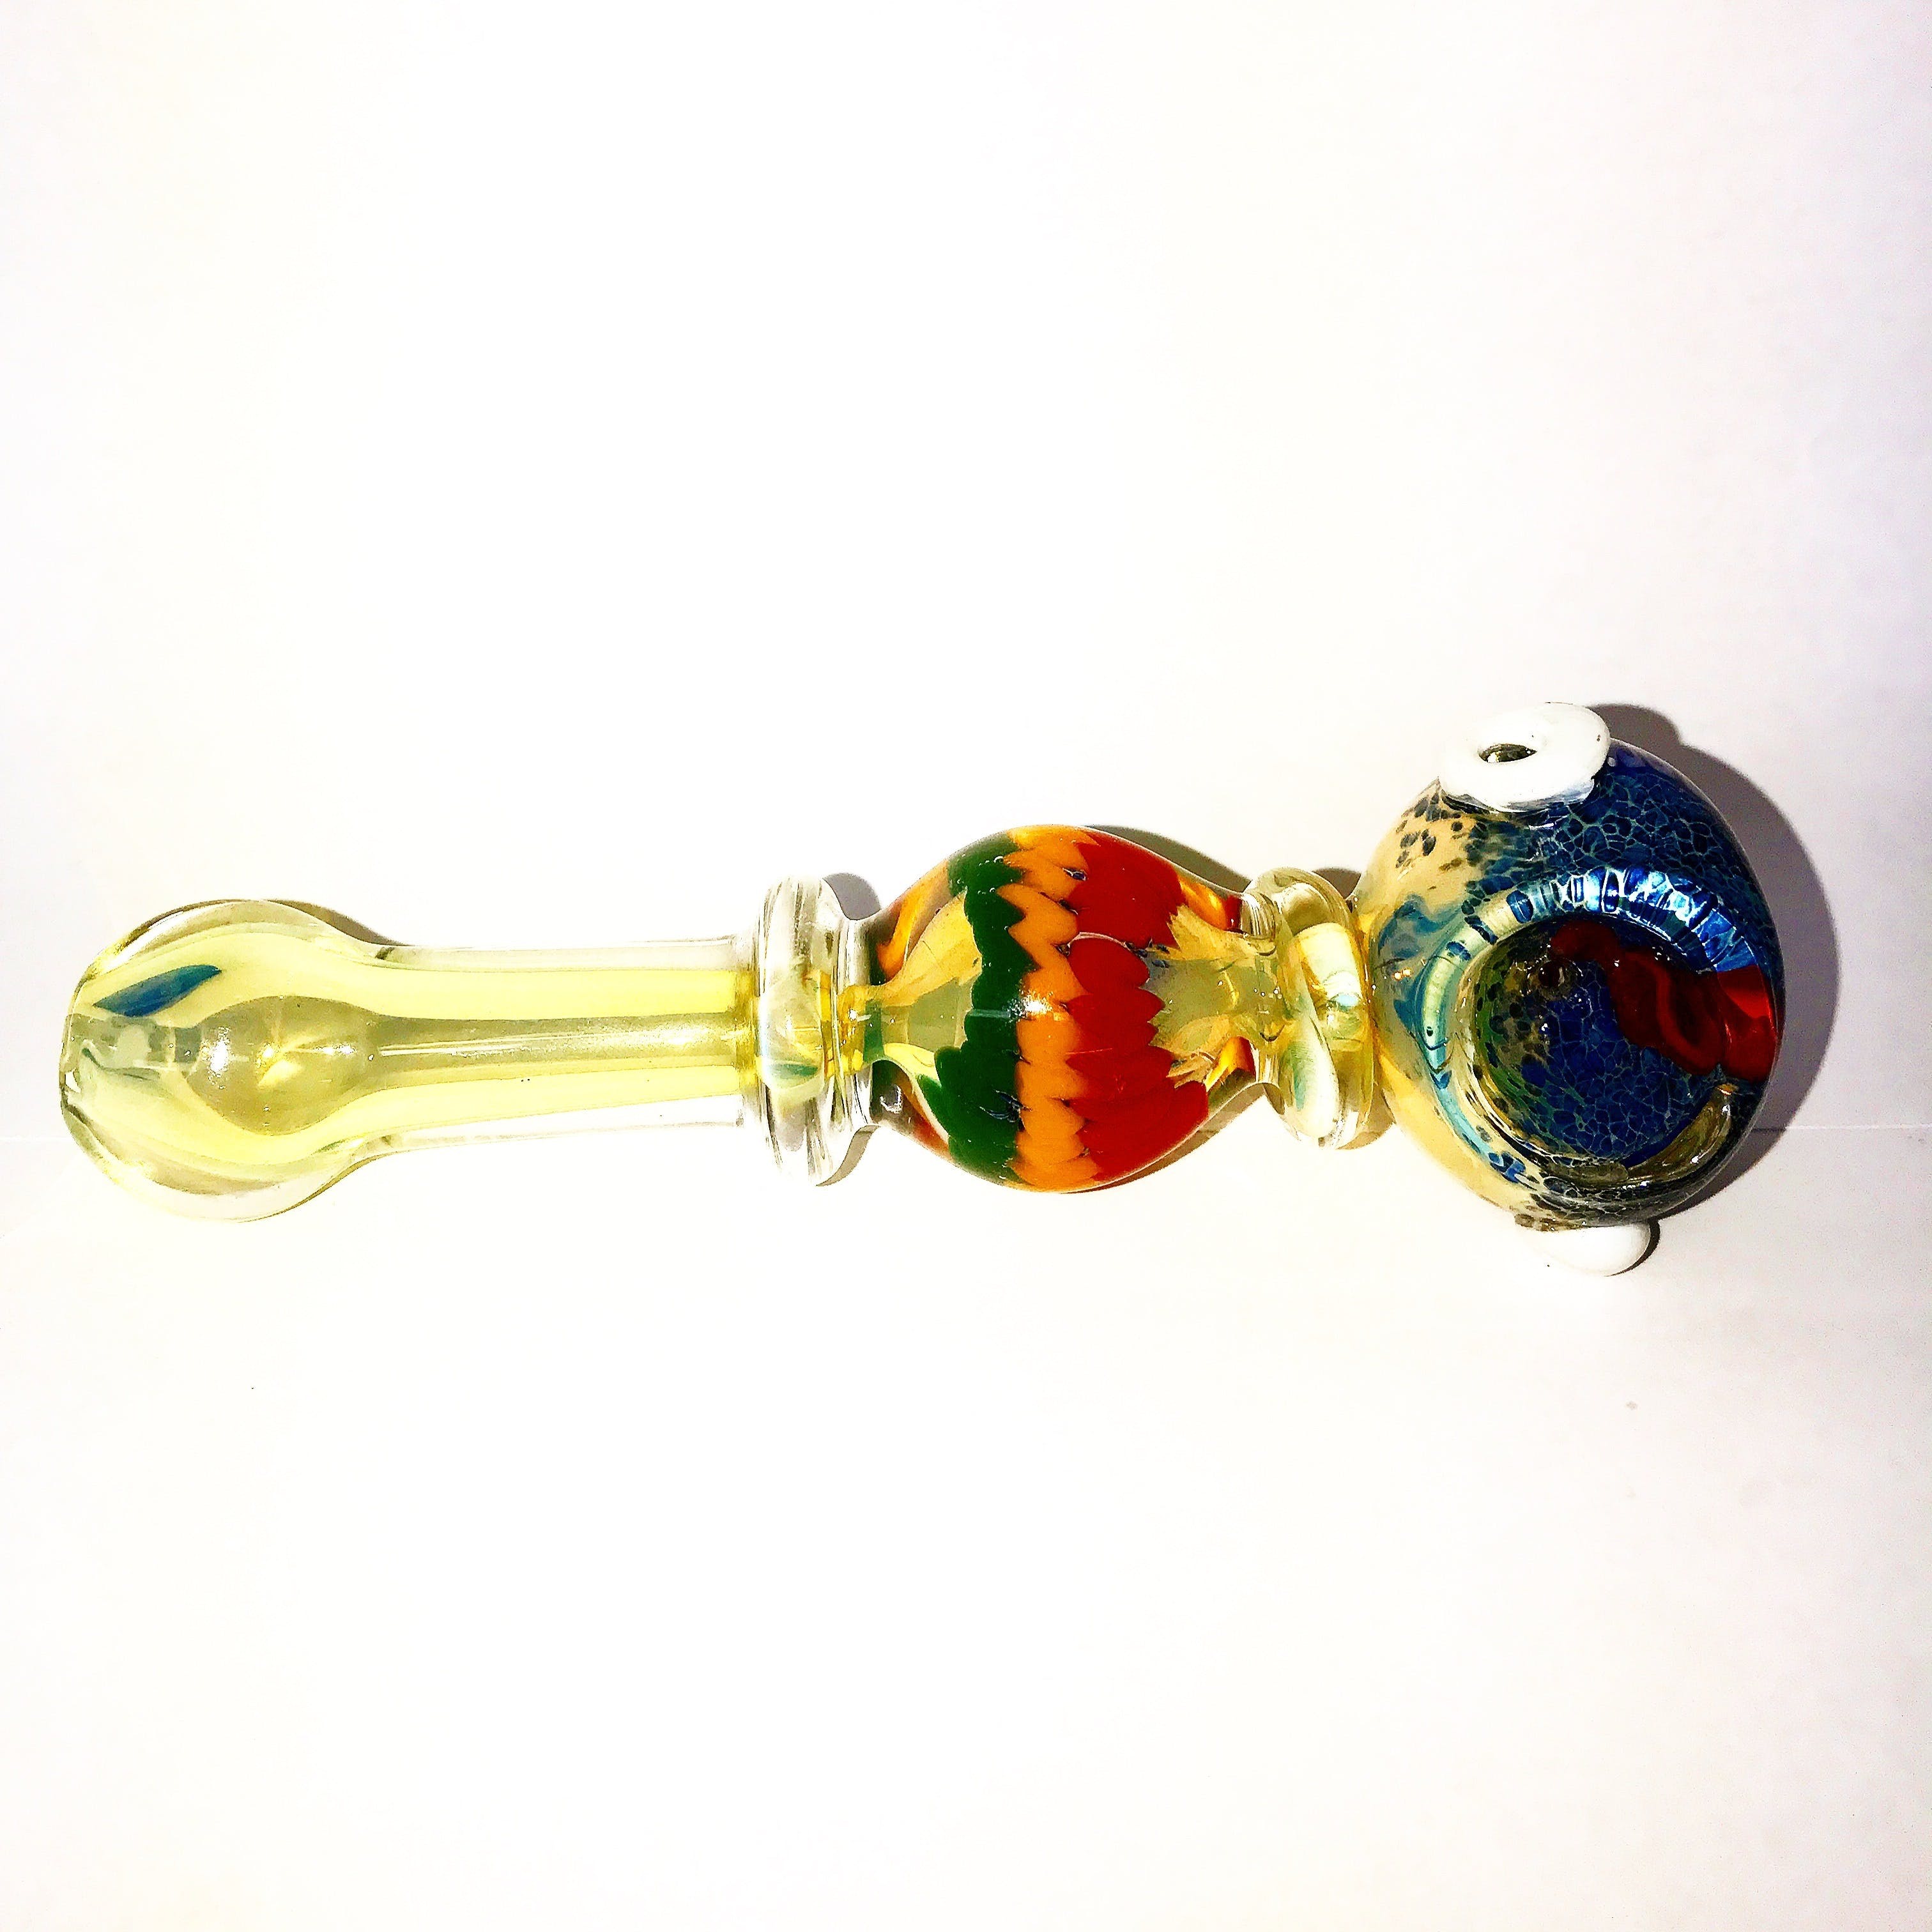 gear-5-inch-thick-glass-pipe